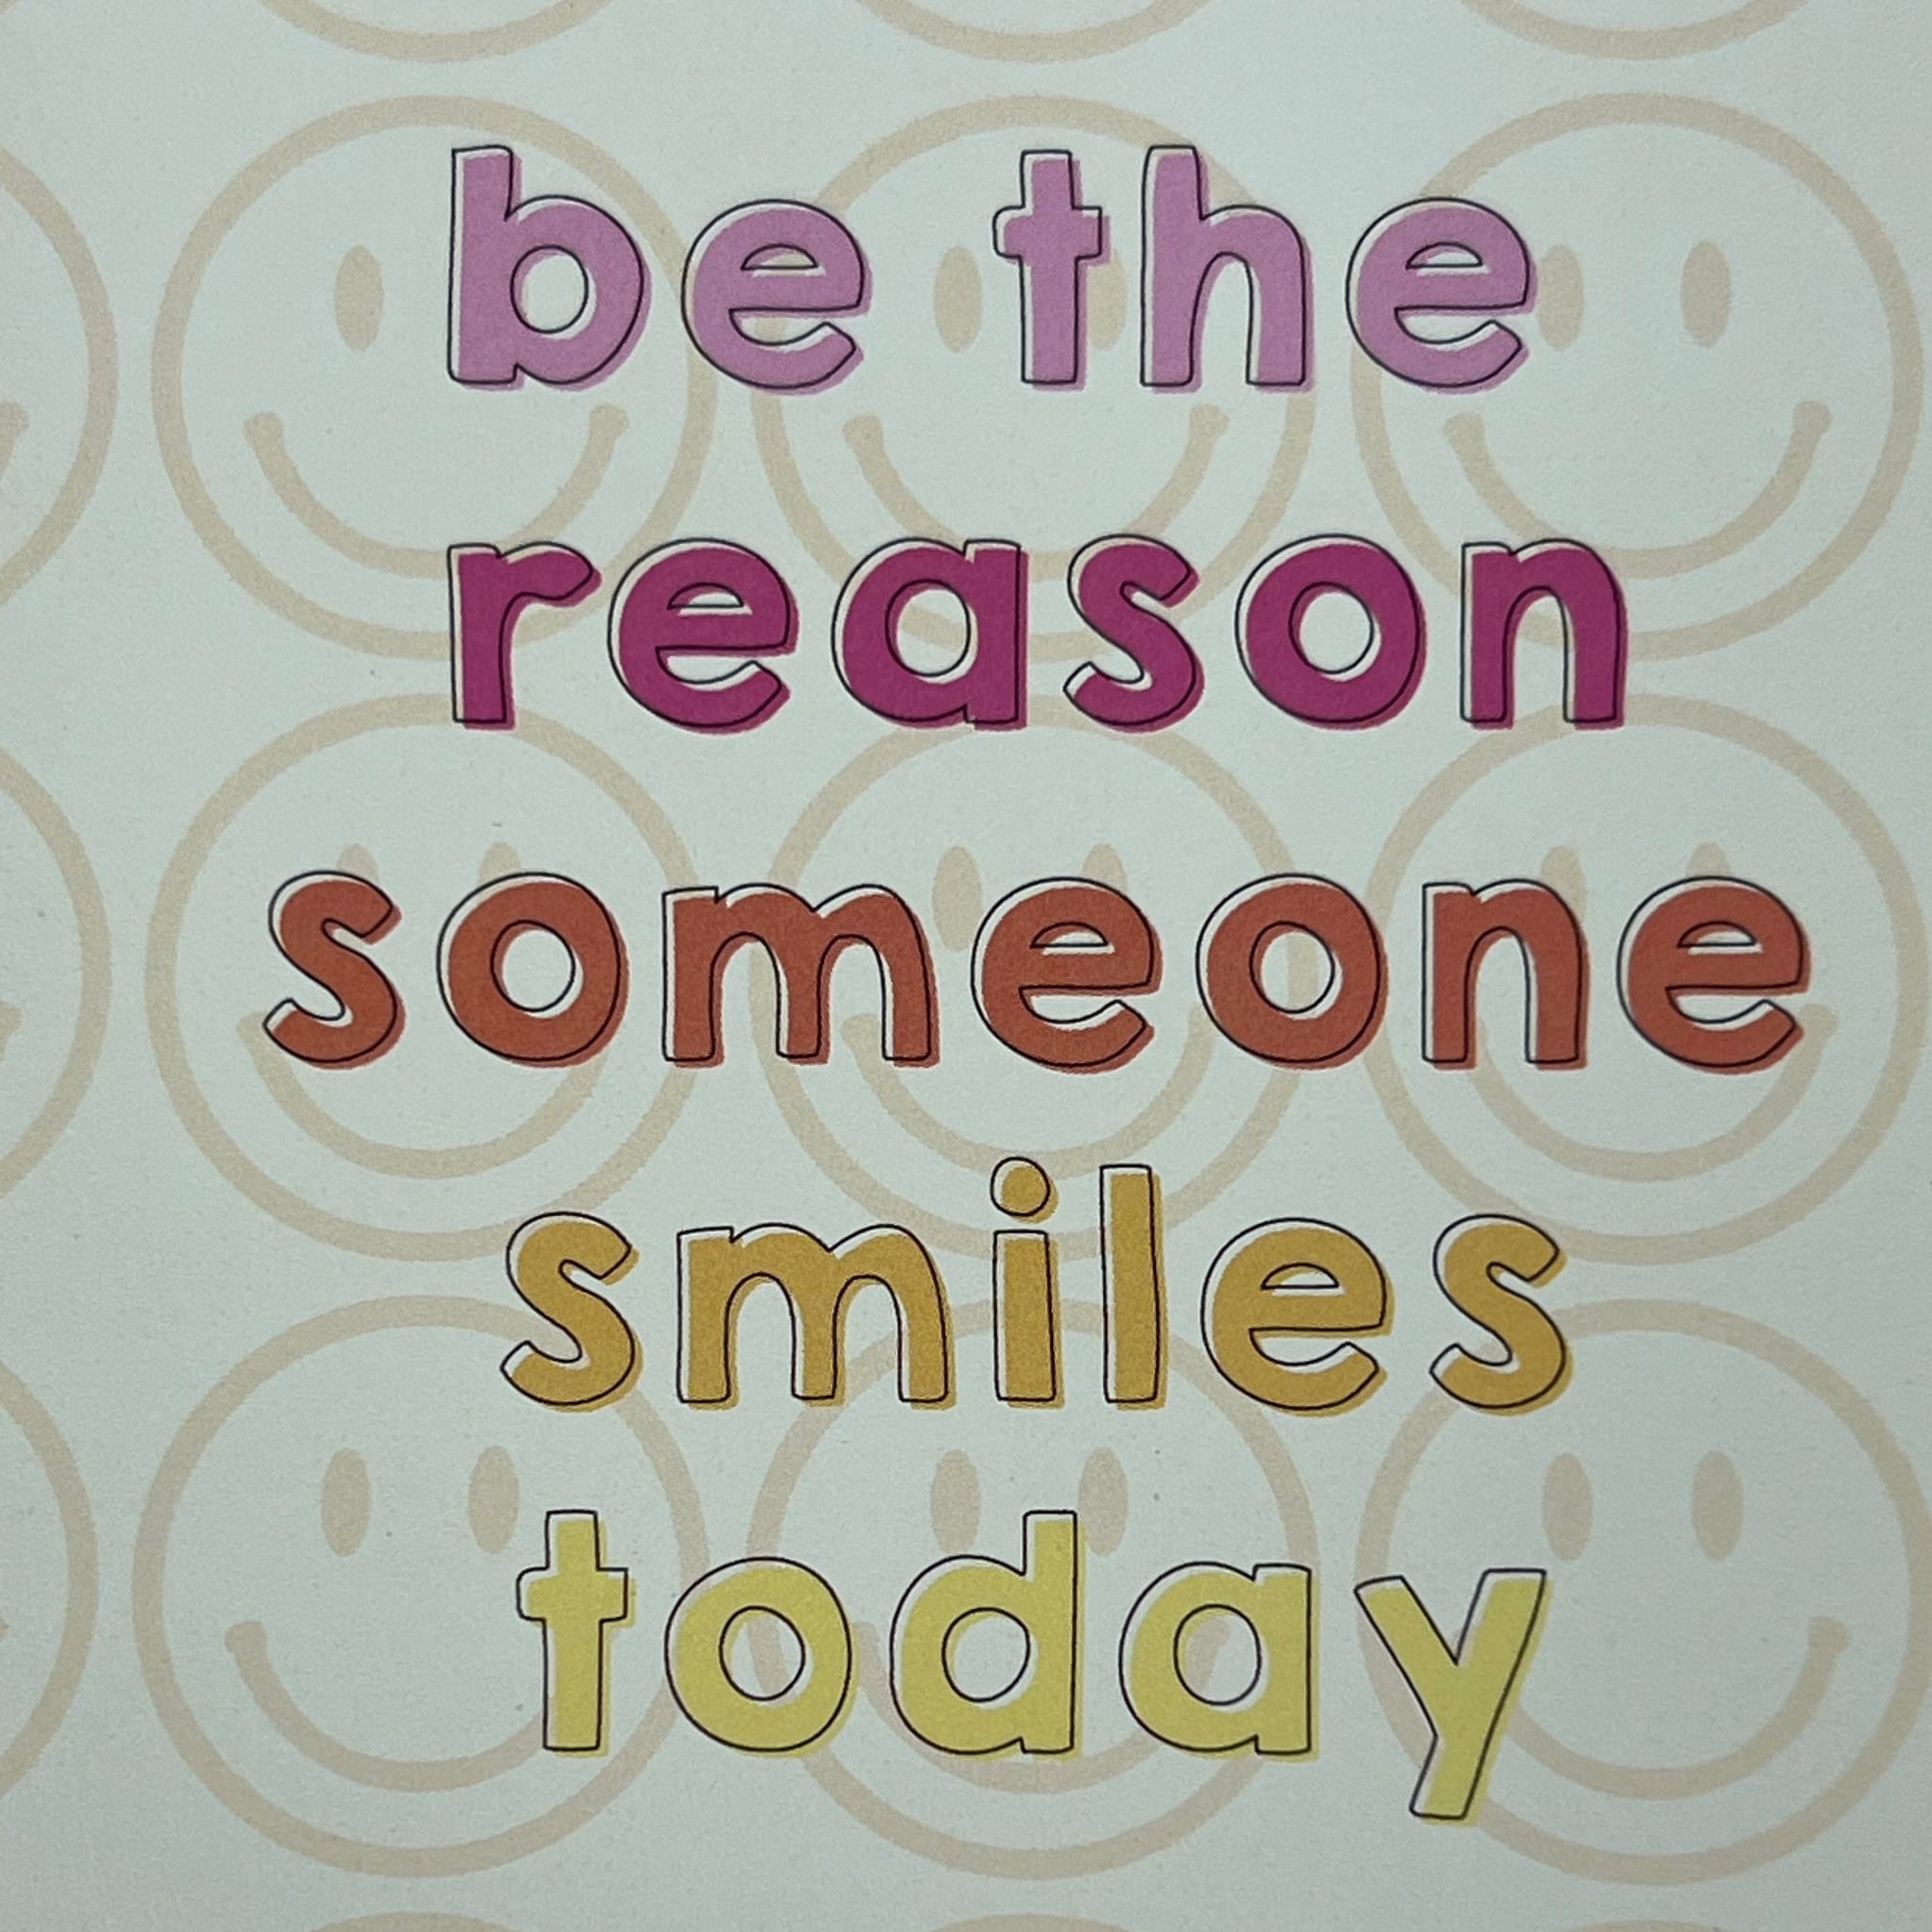 Square magnet with smiley faces in background be the reason someone smiles today 